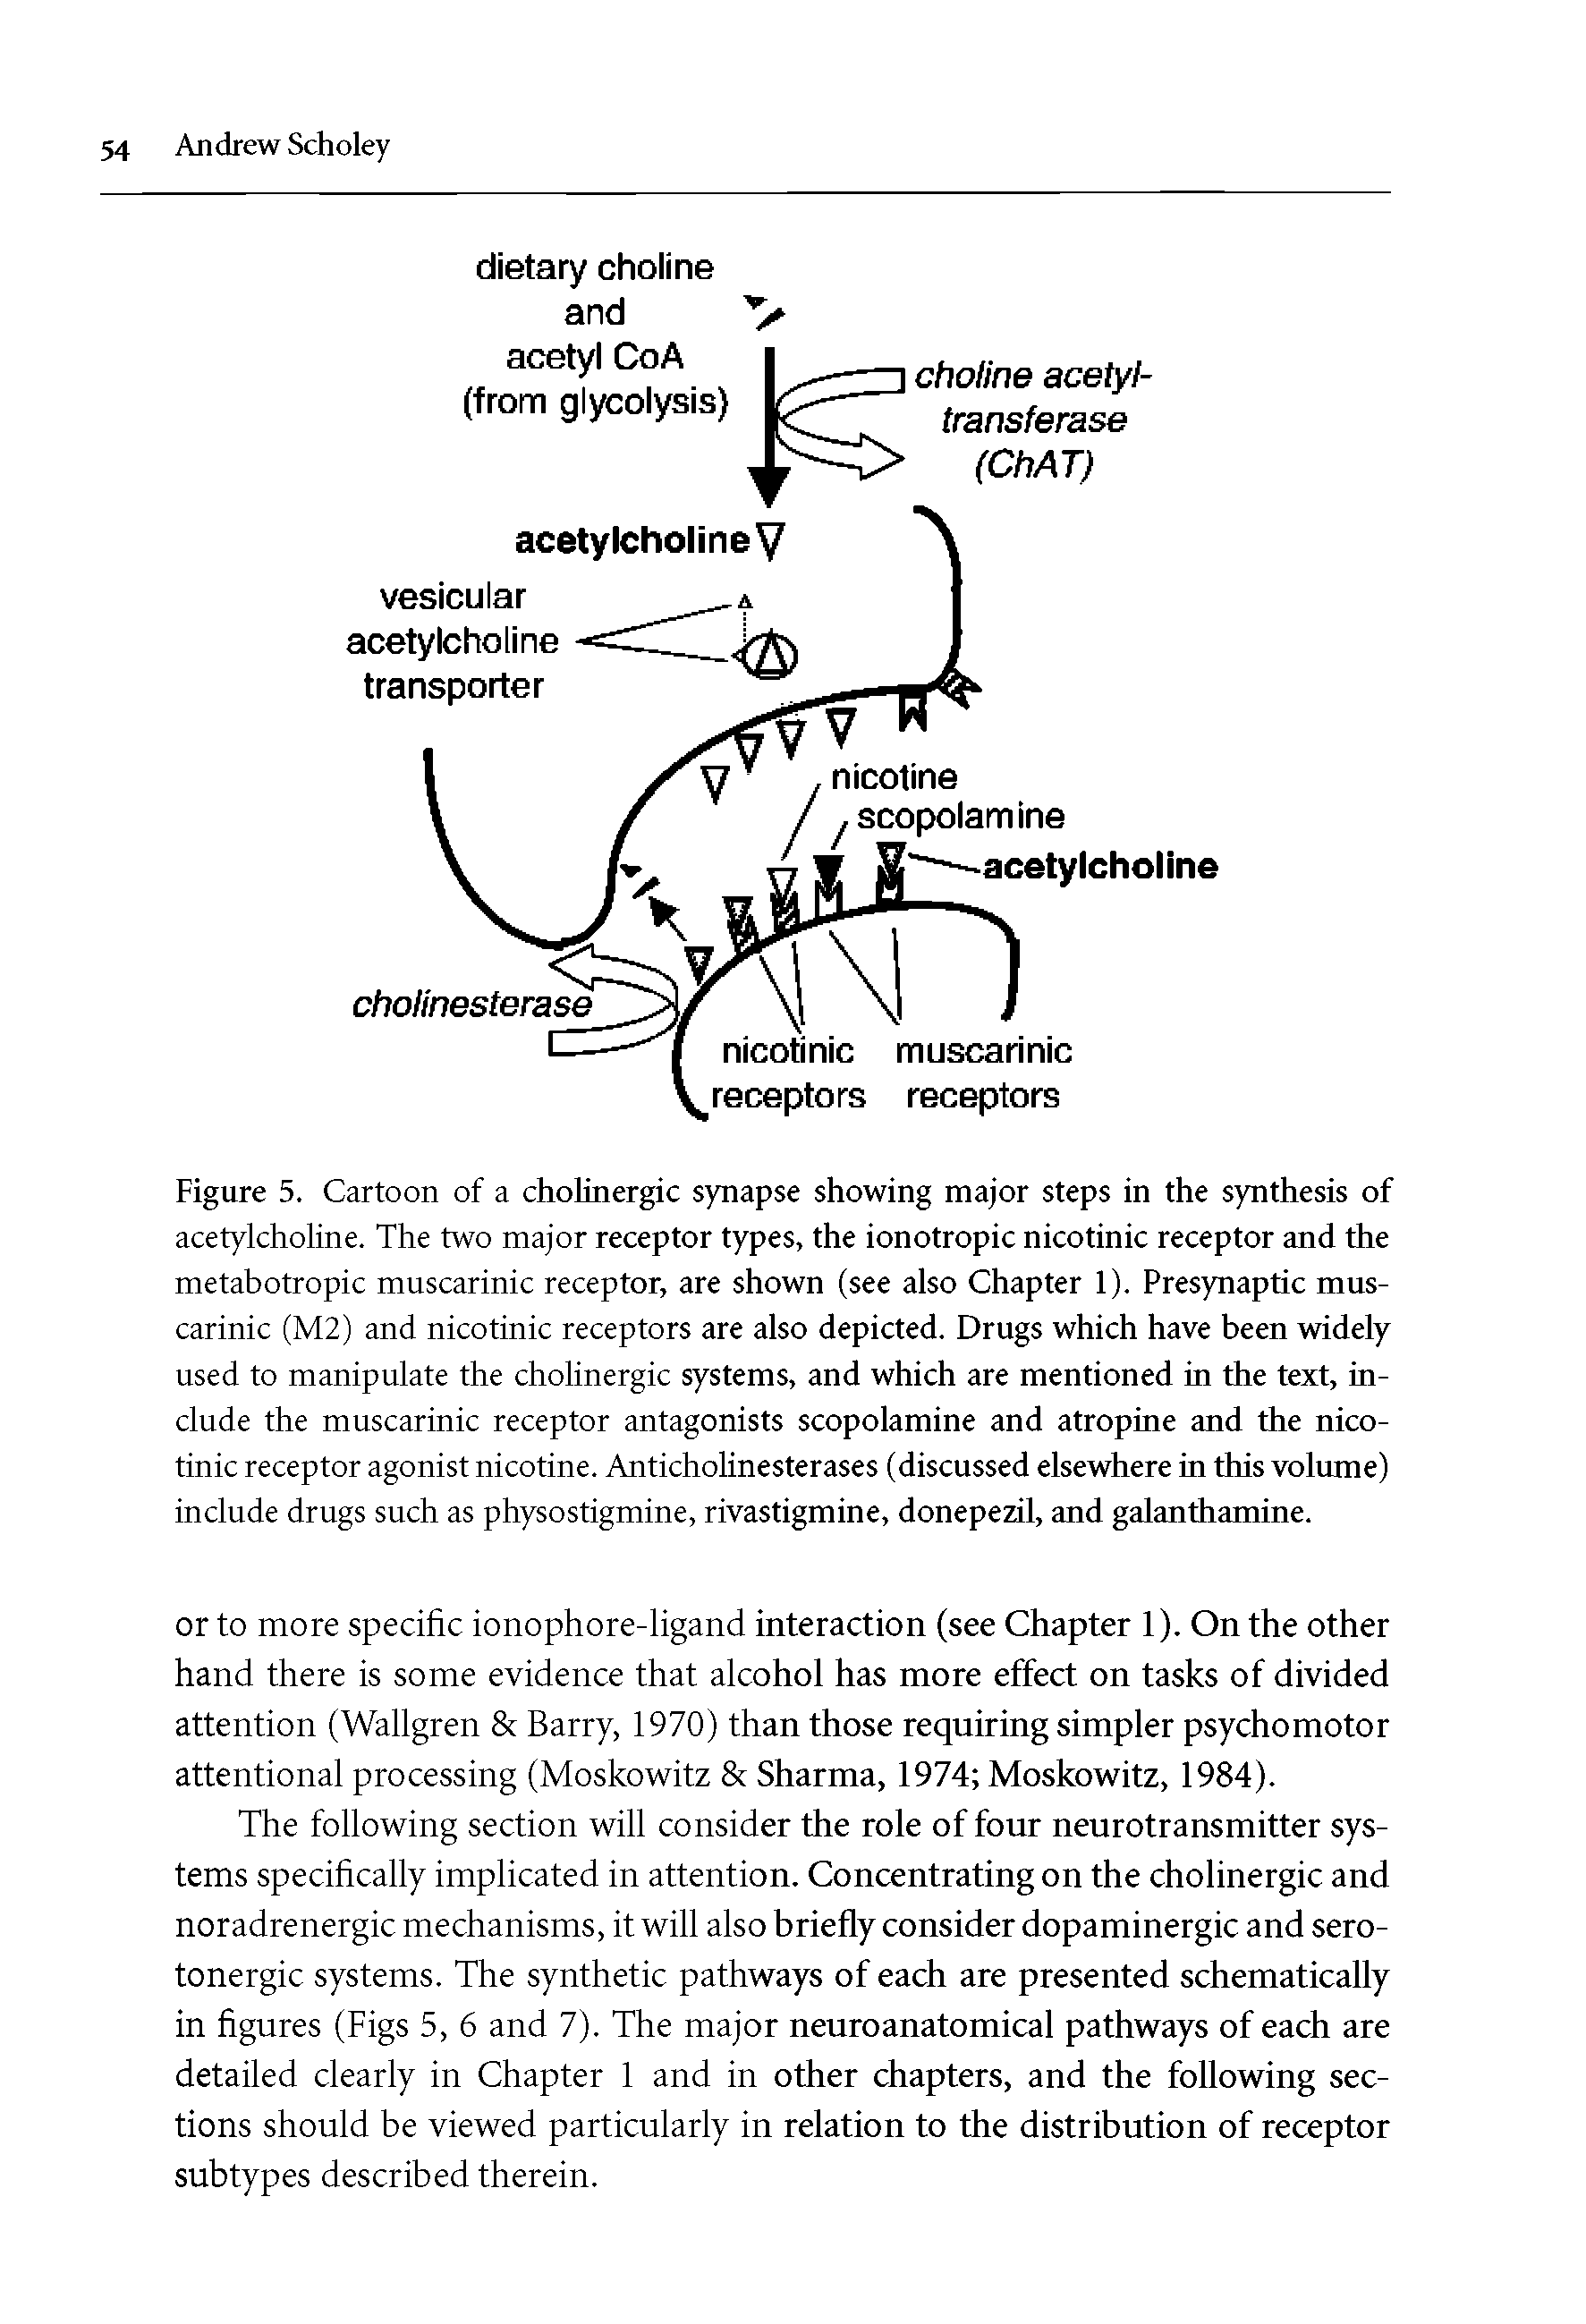 Figure 5. Cartoon of a cholinergic synapse showing major steps in the synthesis of acetylcholine. The two major receptor types, the ionotropic nicotinic receptor and the metabotropic muscarinic receptor, are shown (see also Chapter 1). Presynaptic muscarinic (M2) and nicotinic receptors are also depicted. Drugs which have been widely used to manipulate the cholinergic systems, and which are mentioned in the text, include the muscarinic receptor antagonists scopolamine and atropine and the nicotinic receptor agonist nicotine. Anticholinesterases (discussed elsewhere in this volume) include drugs such as physostigmine, rivastigmine, donepezil, and galanthamine.